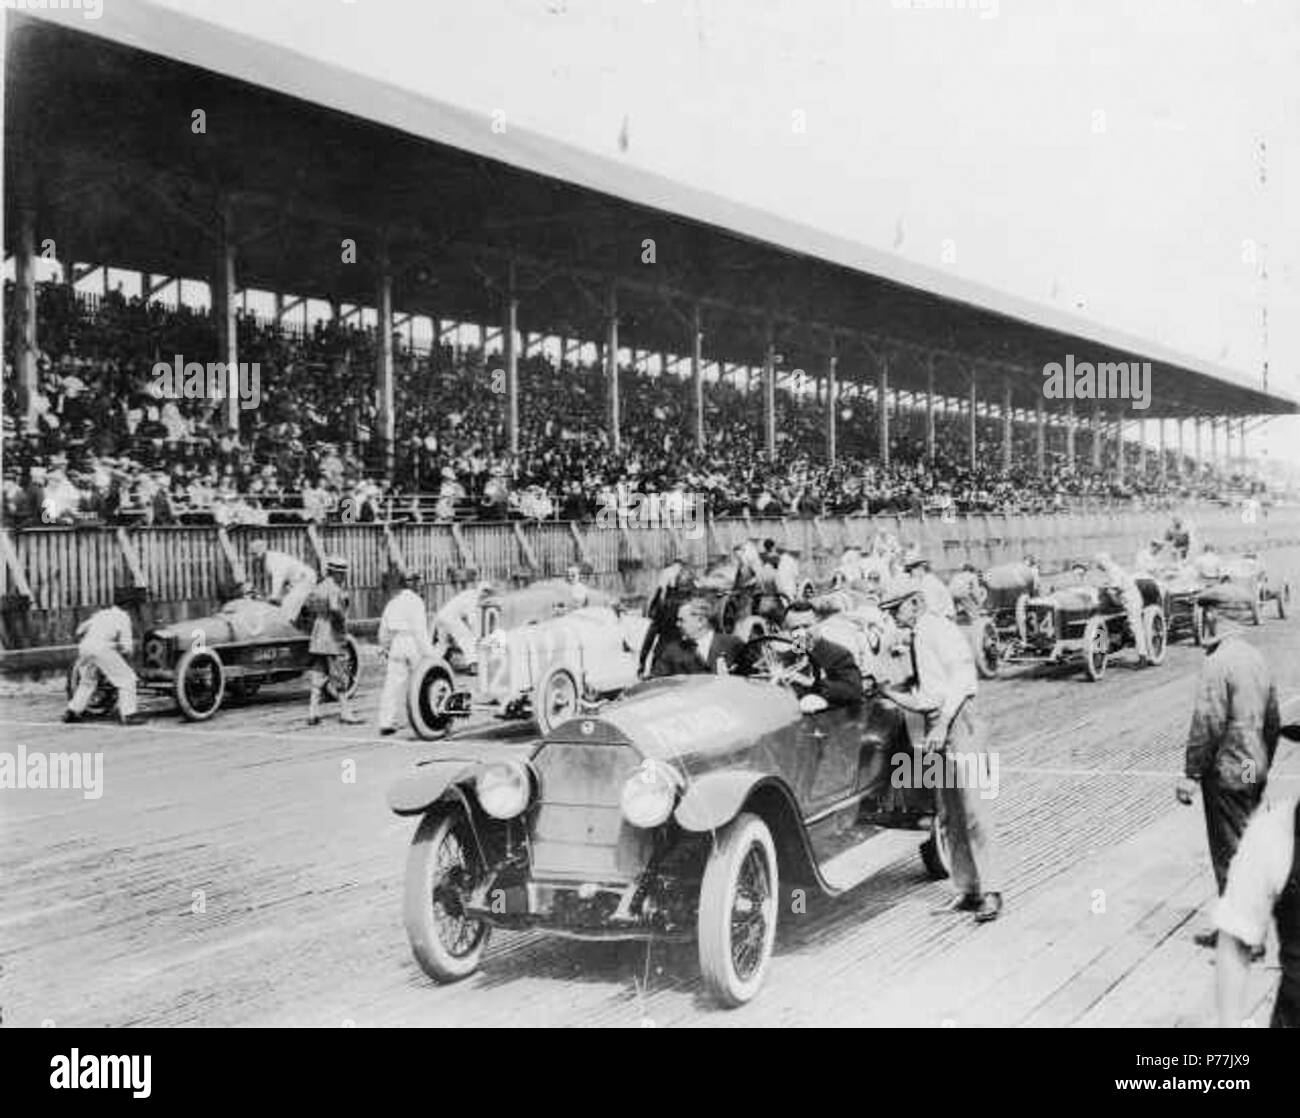 English: On July 4th 1922, thirty thousand fans crowded into the stands at the Tacoma Speedway to watch what turned out to be the last car race held at the Tacoma track. Ten drivers competed in the 250-mile race. The cars are lining up behind the pace car, driven by Barney Oldfield, prior to the checkered flag. Lined up are (l to r): front row- Tommy Milton #8 Leach Special, Harry Hartz #12 Duesenberg, Jimmy Murphy #35 Murphy Special; 2nd row- Joe Thomas #10 Duesenberg, Roscoe Sarles in the #31 Duesenberg, Cliff Durant in the #34 Durant Special; 3rd row- 'Howdy' Wilcox in the #16 Puegeot, Art  Stock Photo